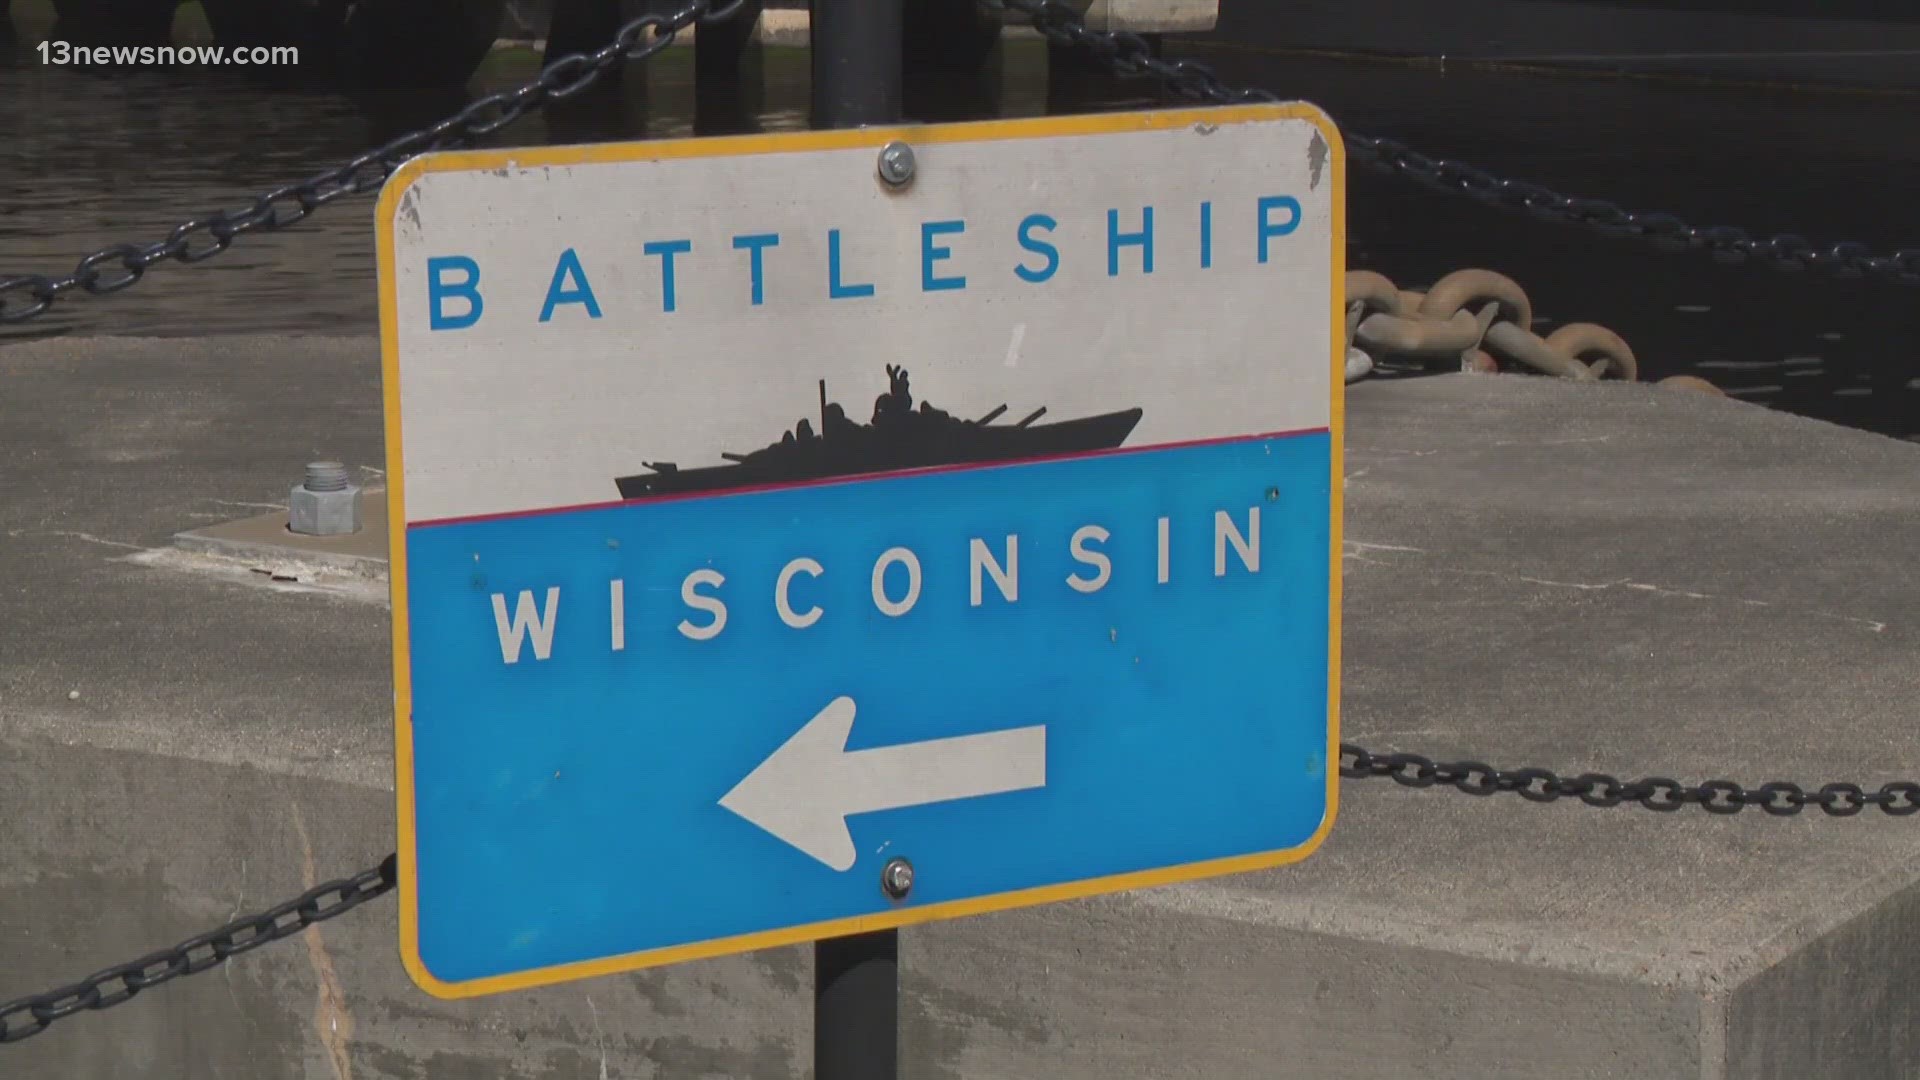 The Wisconsin was the last battleship built by the Navy.